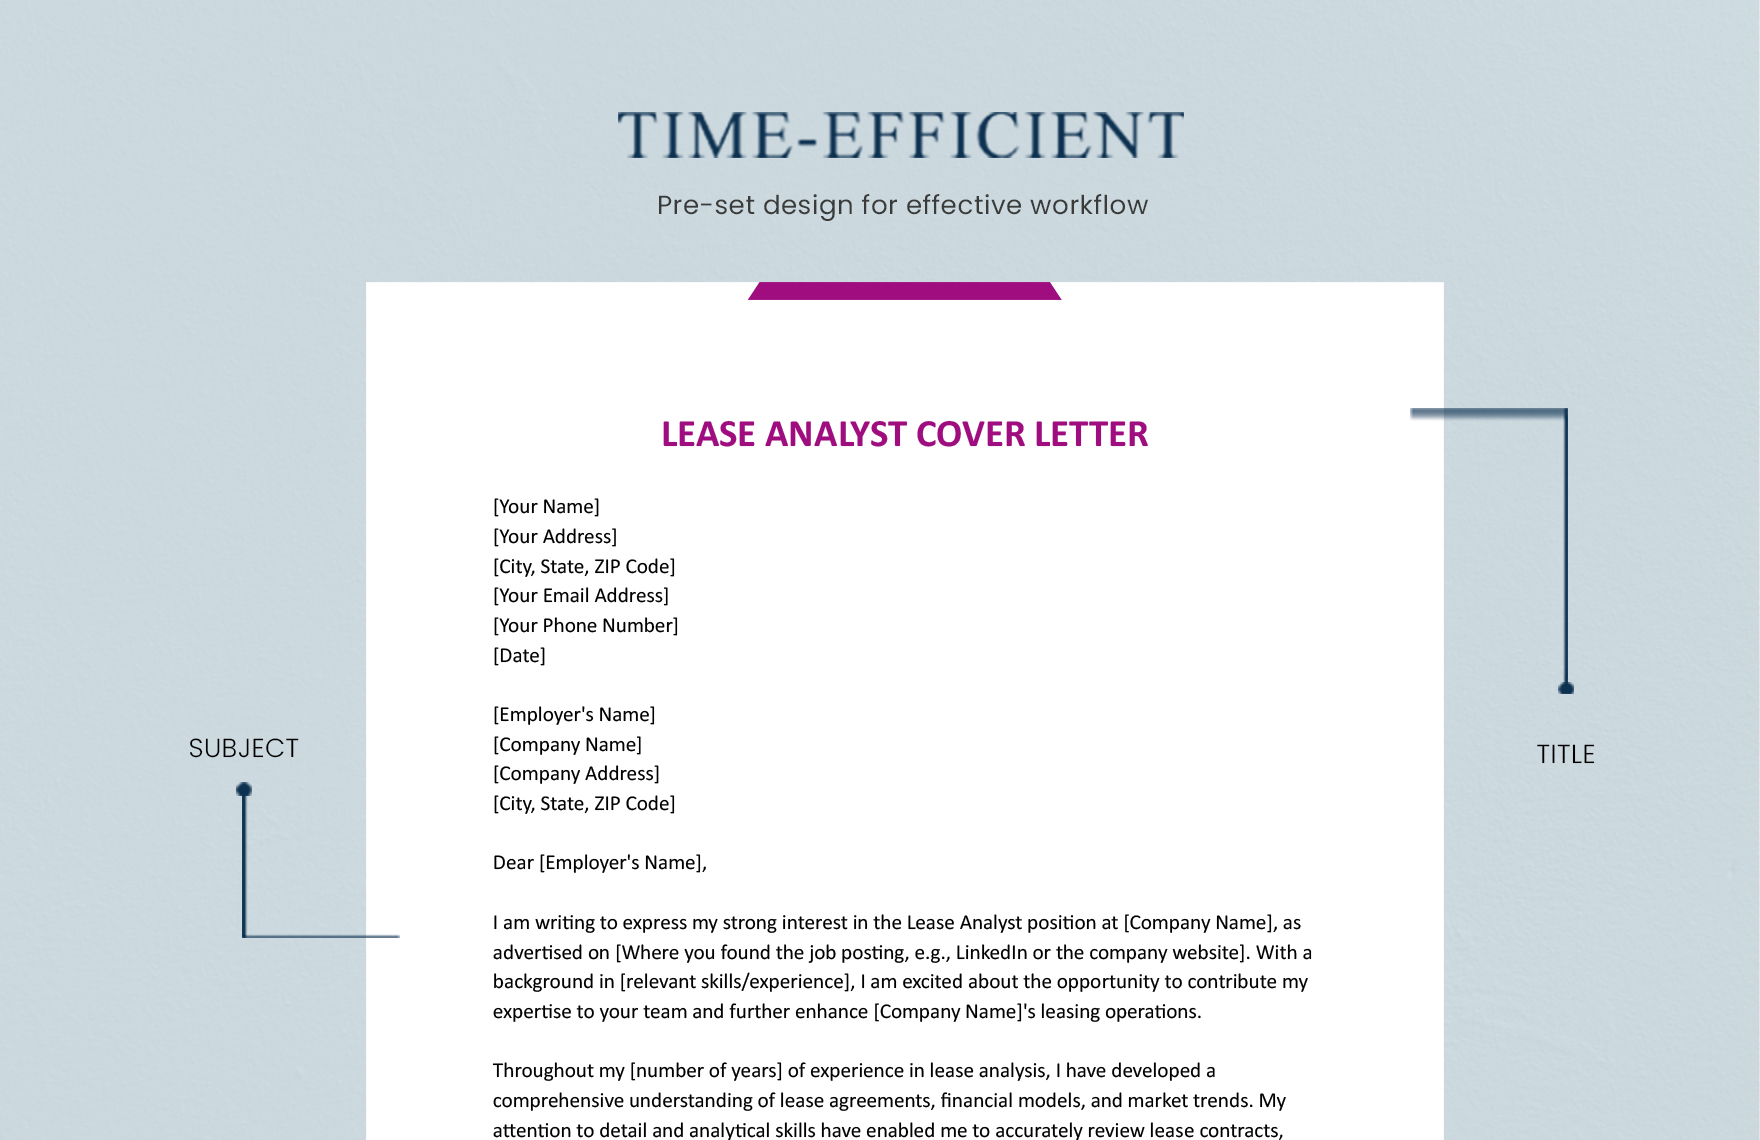 Lease Analyst Cover Letter